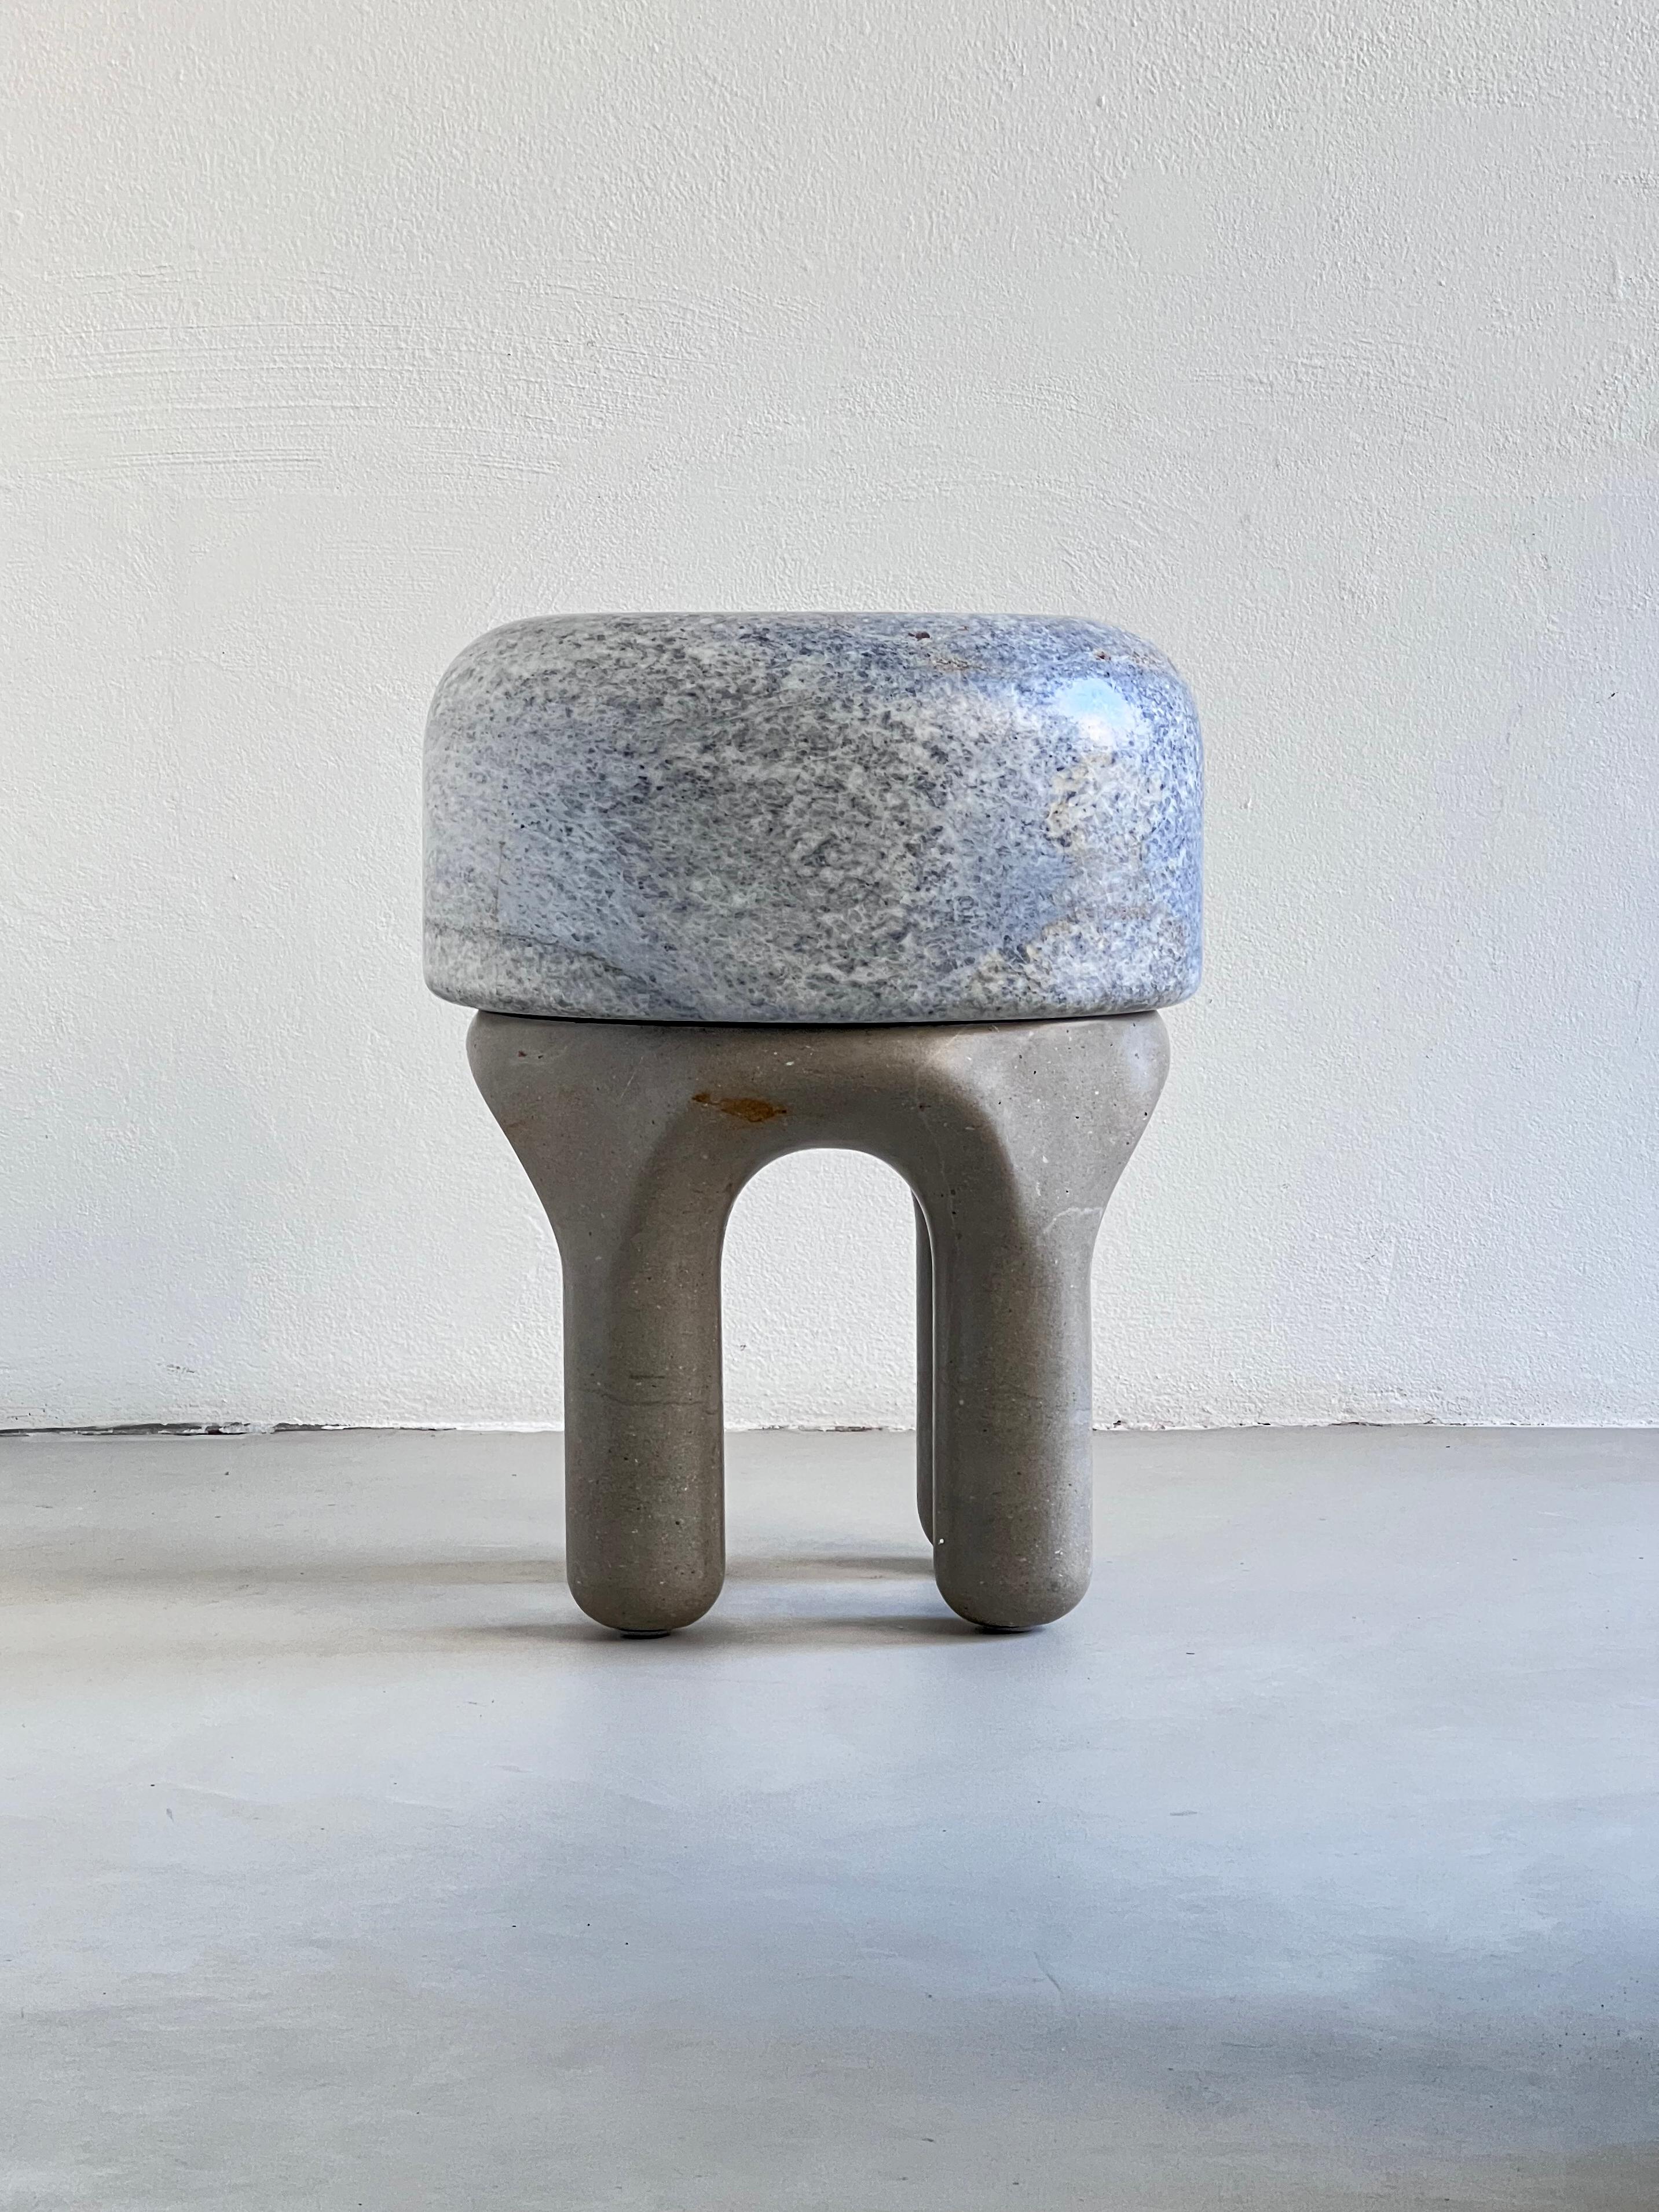 Italian Marble Stool - Collectible Italian Design - Sculptural Side Table - Lake Como Inspired

Spinzi’s dream of jellyfishes swimming in the waters of lake Como came to life in Medusa, shaping marble pieces into the sinuous elegance of these